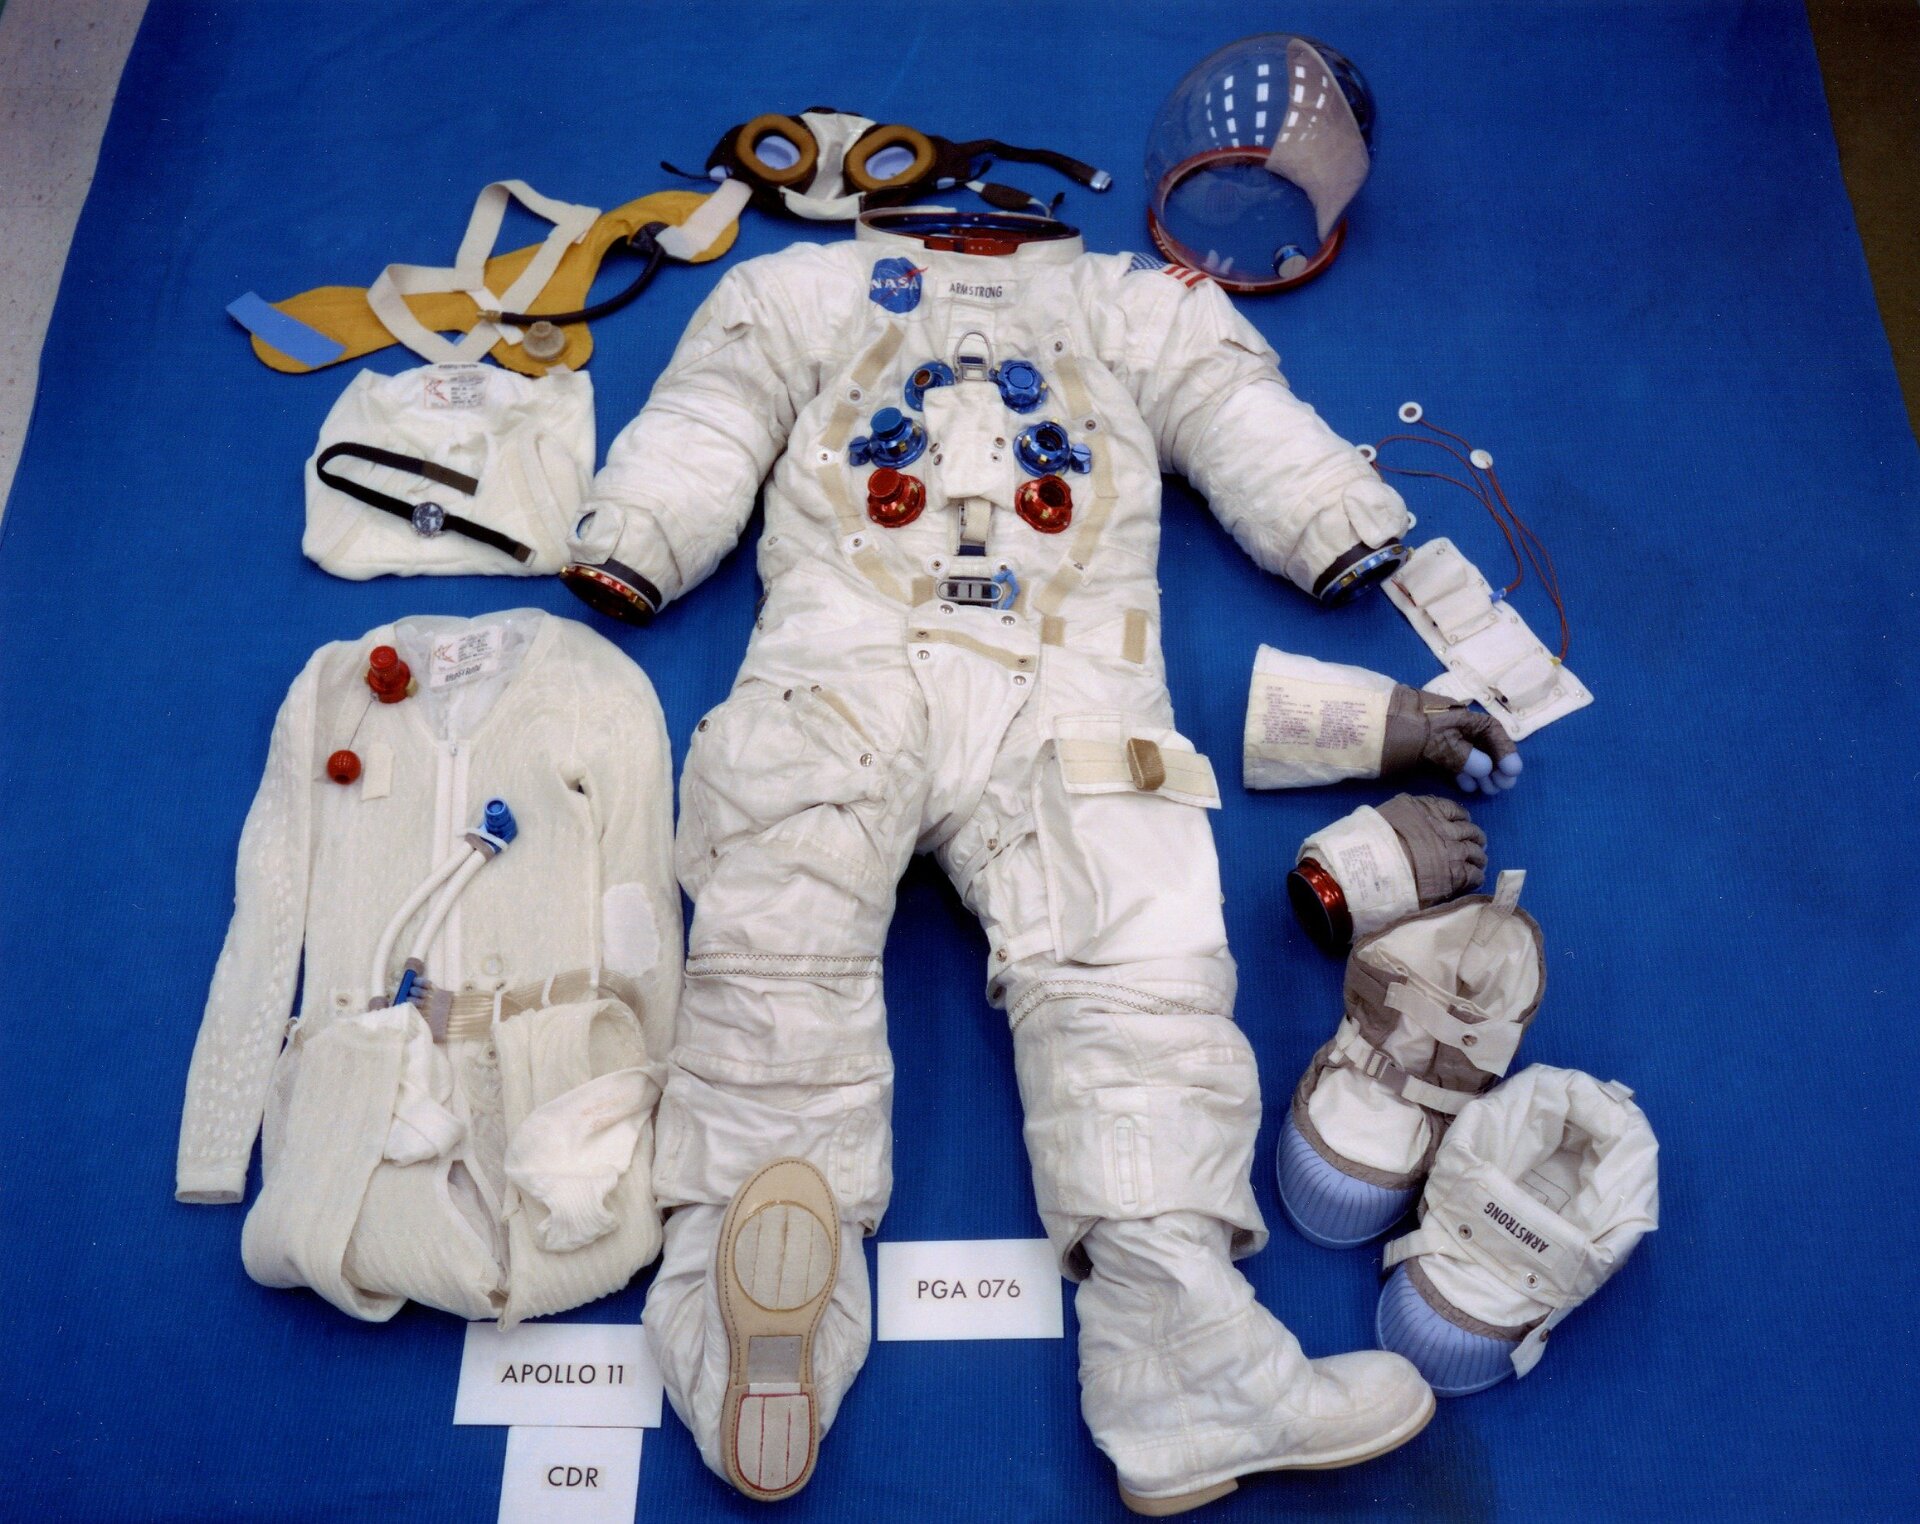 Armstrong's spacesuit prepared for launch day